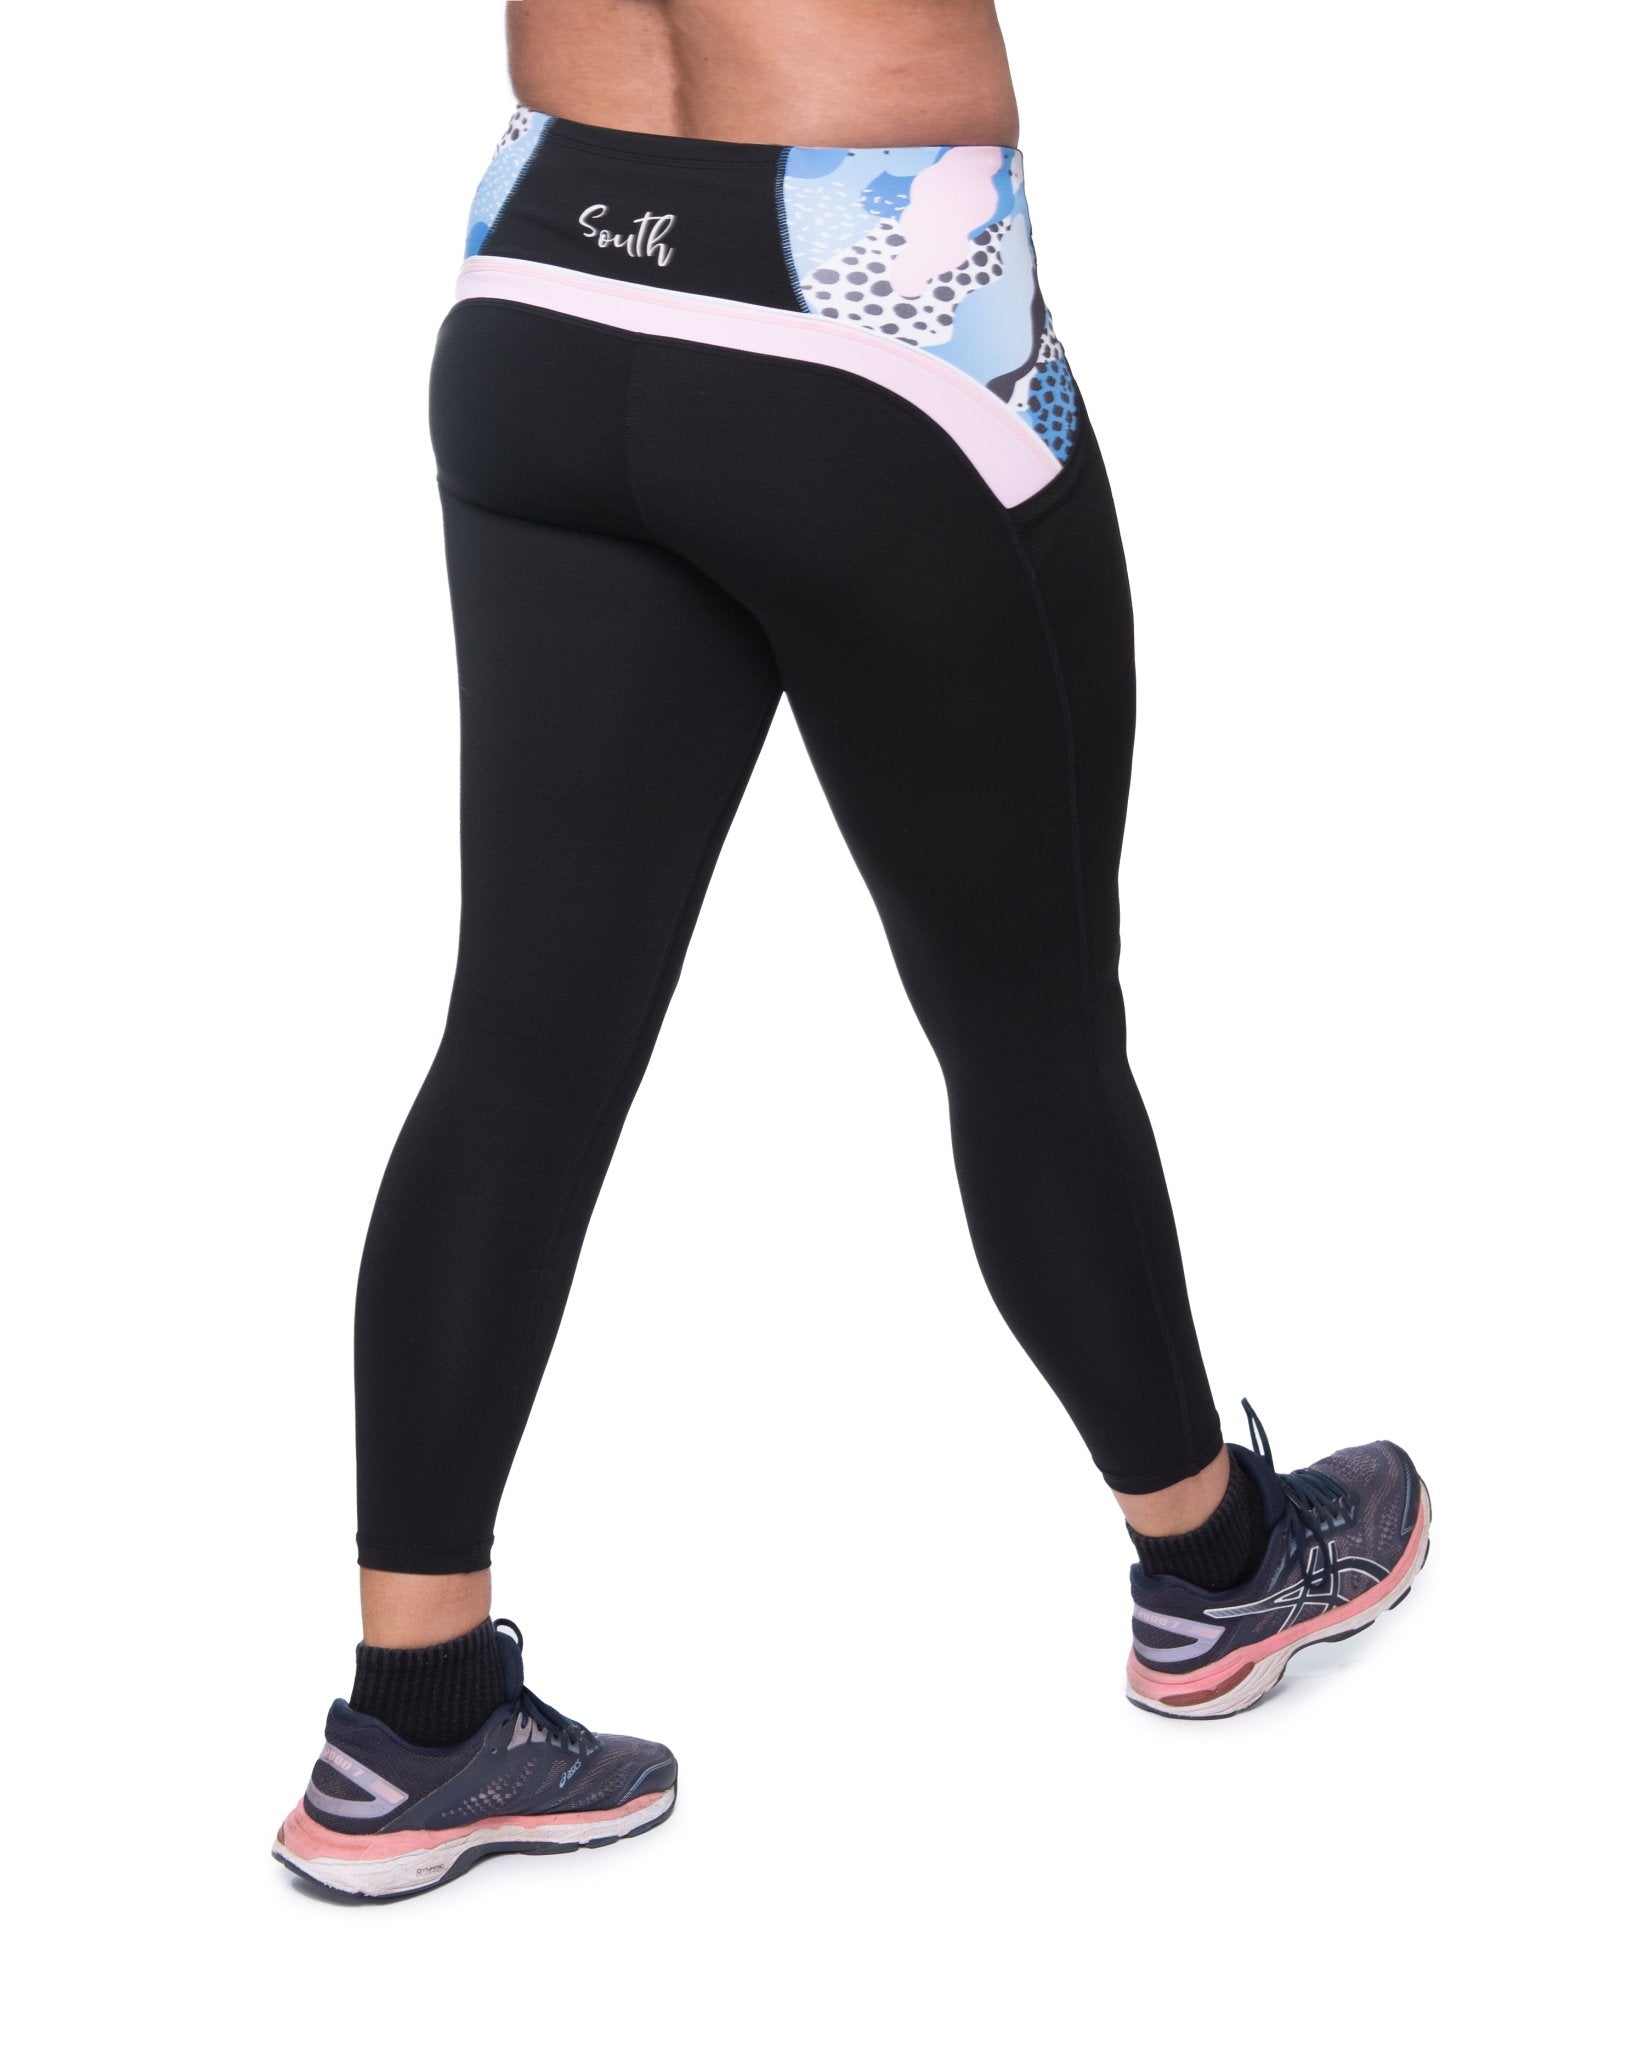 Michele Hi-Rise 7/8 Tight - Coming Up Roses – Illusions Activewear